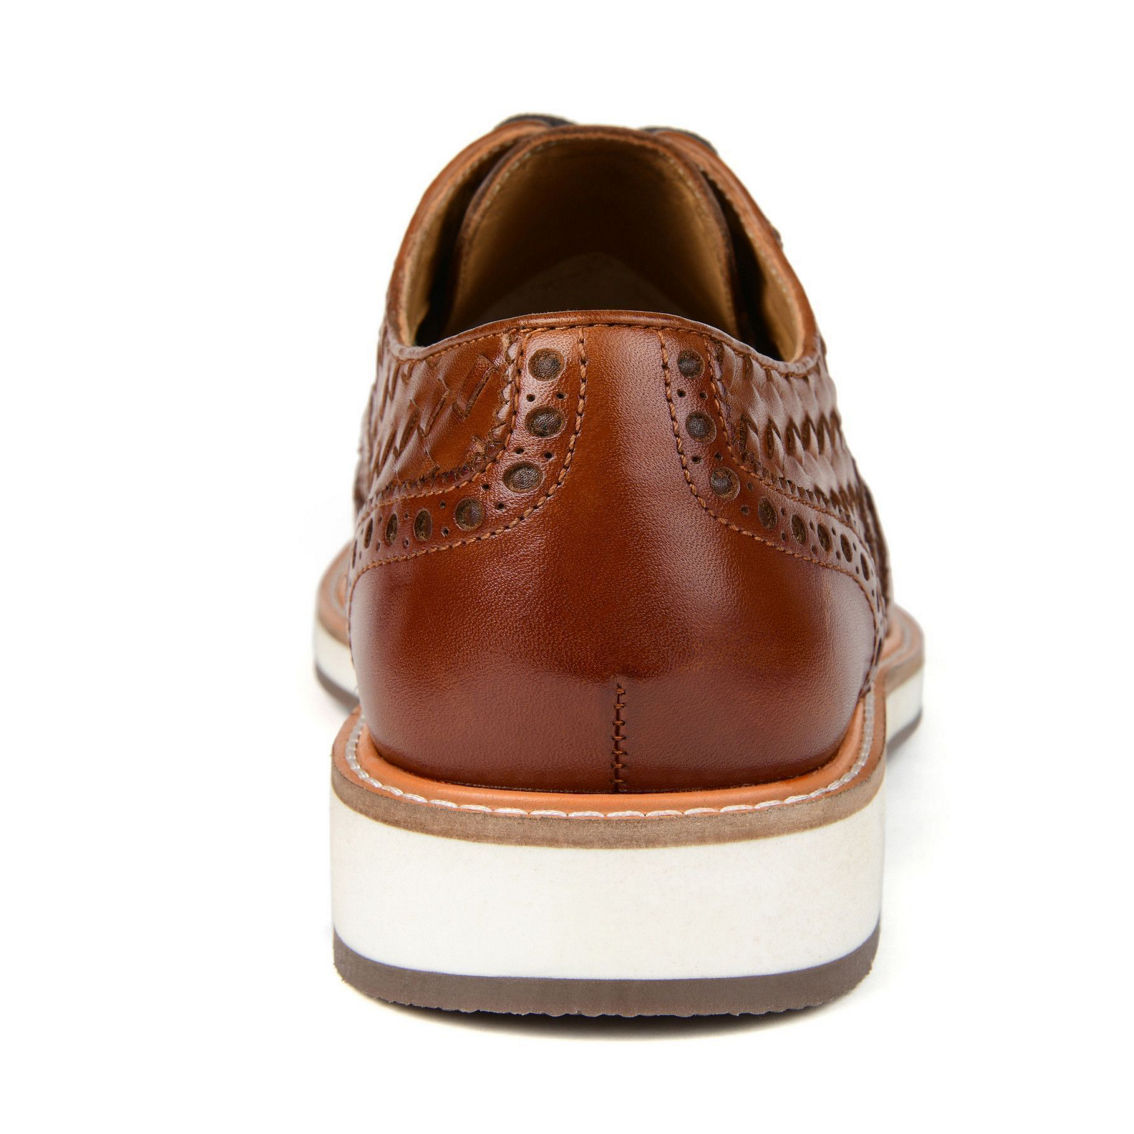 Thomas & Vine Radcliff Woven Wingtip Derby - Image 3 of 5